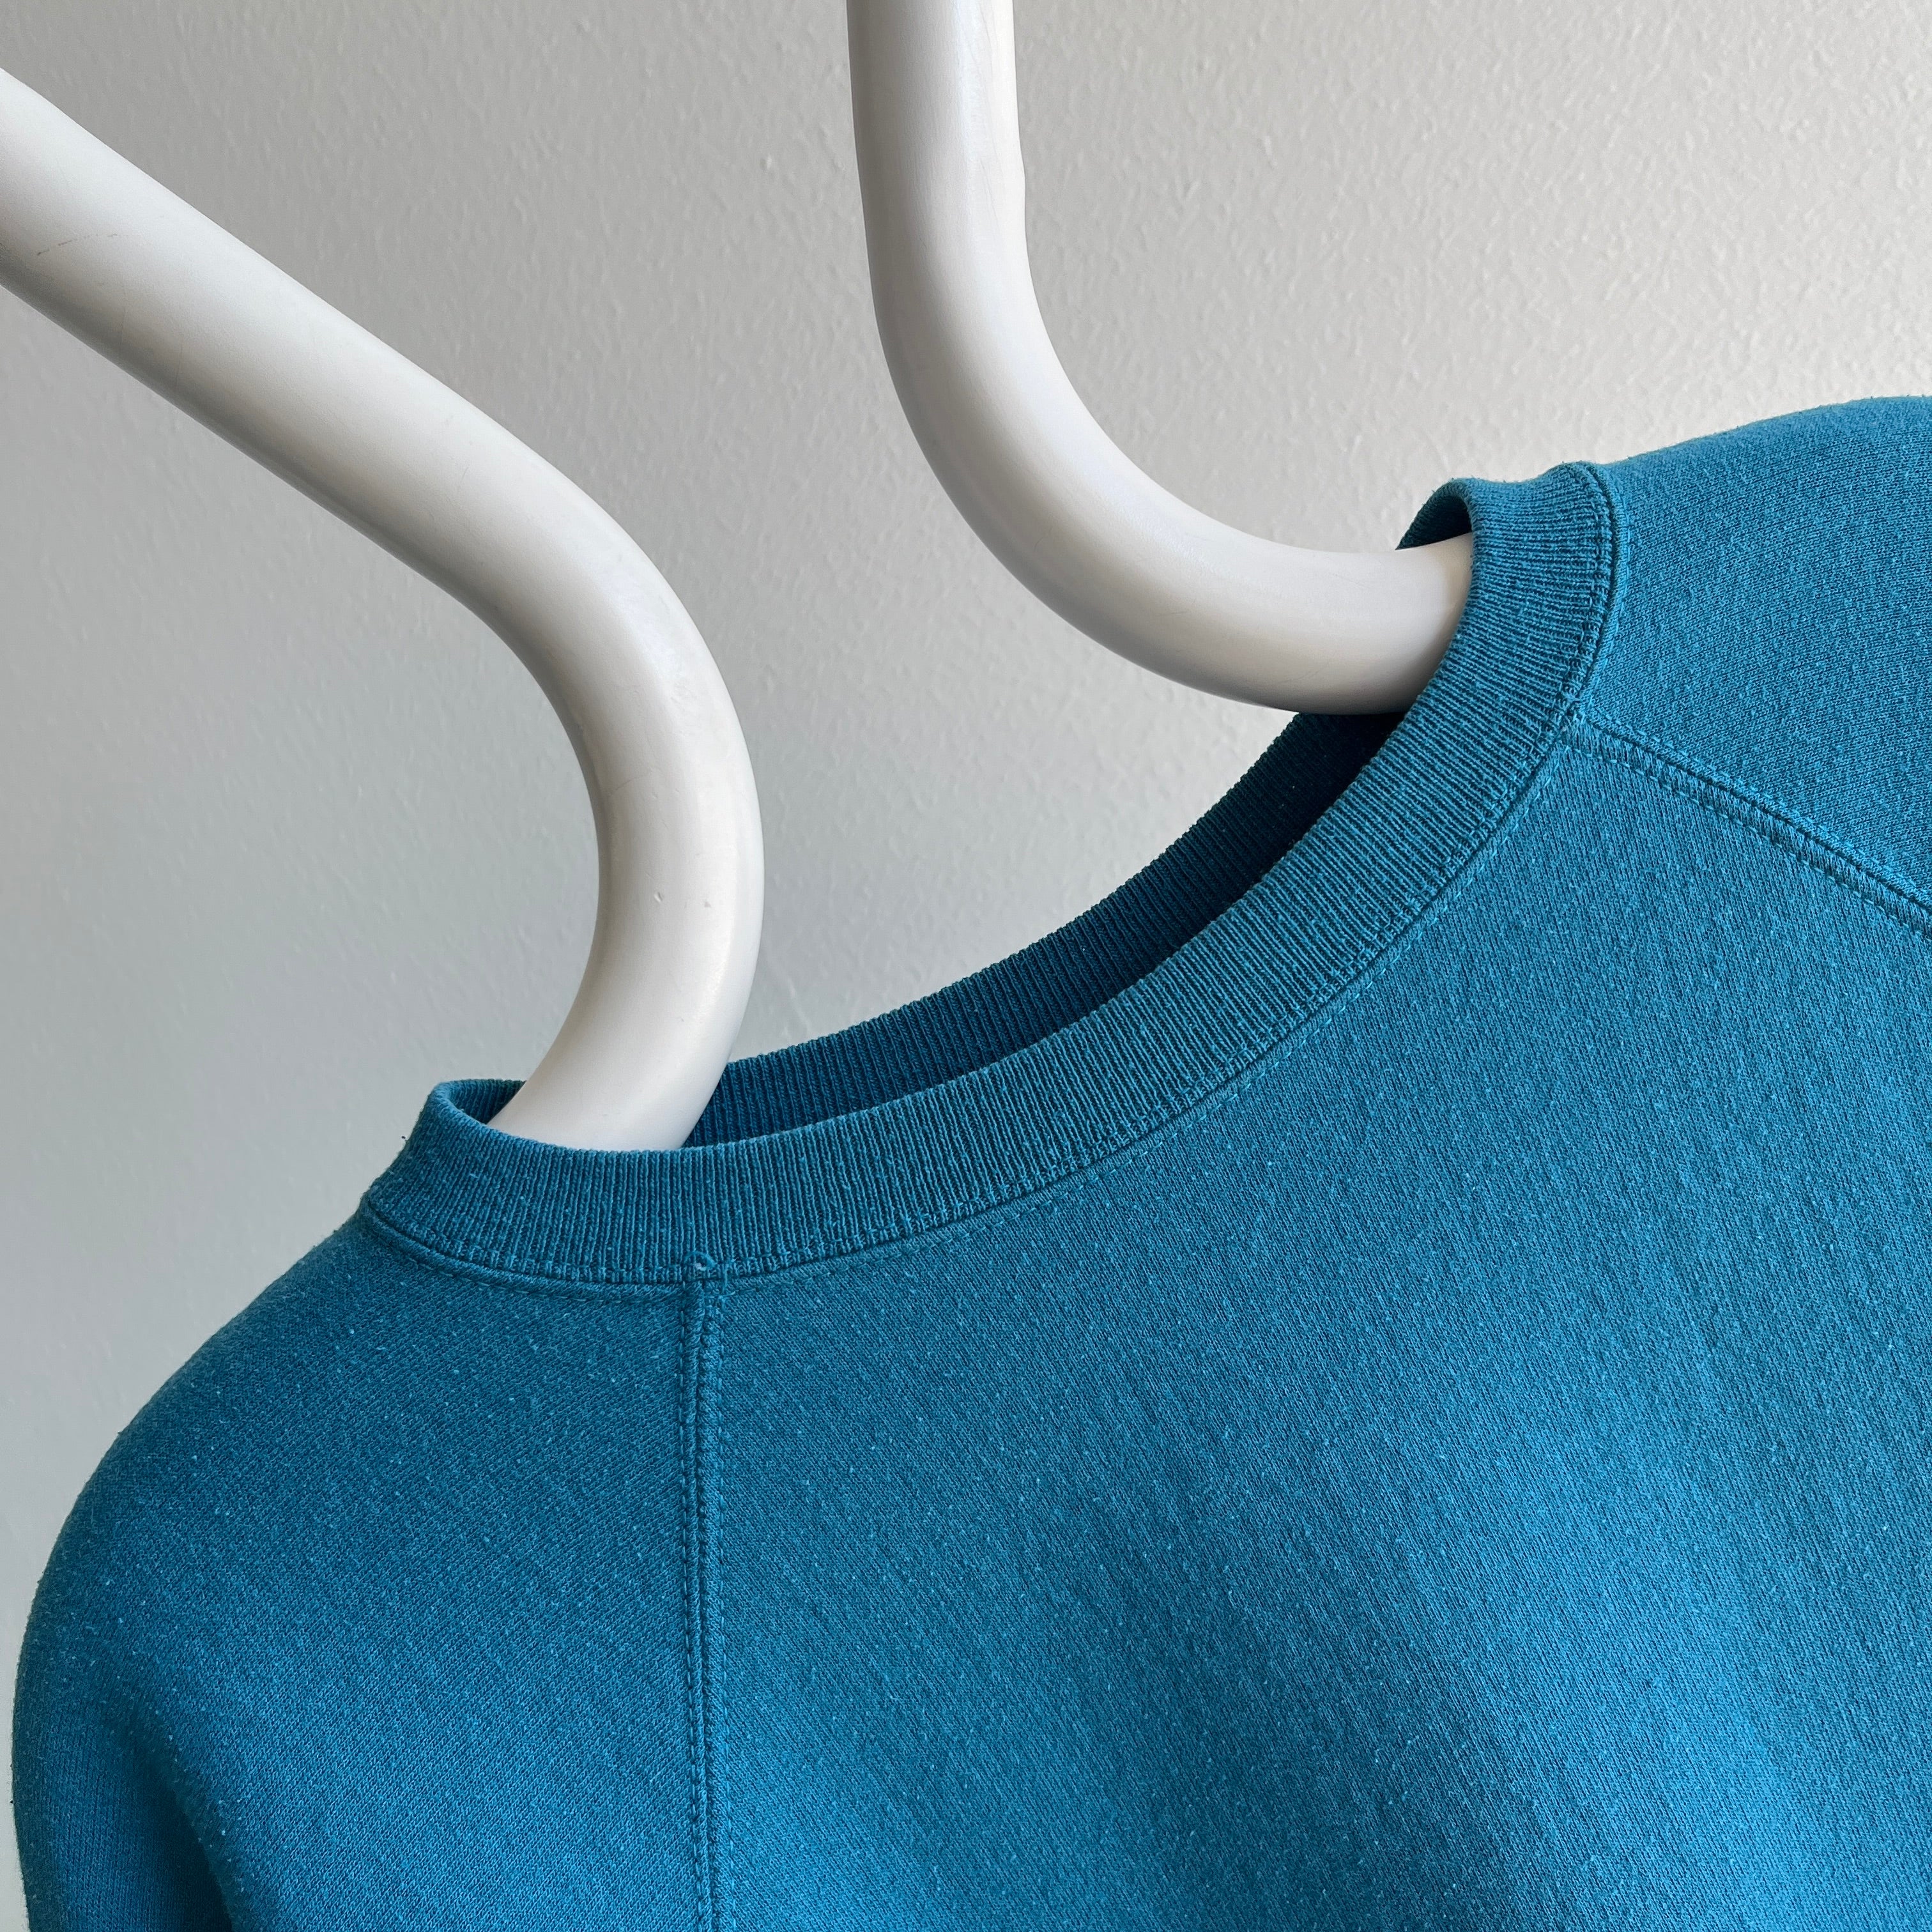 1980s Teal Sweatshirt with Great Dimensions